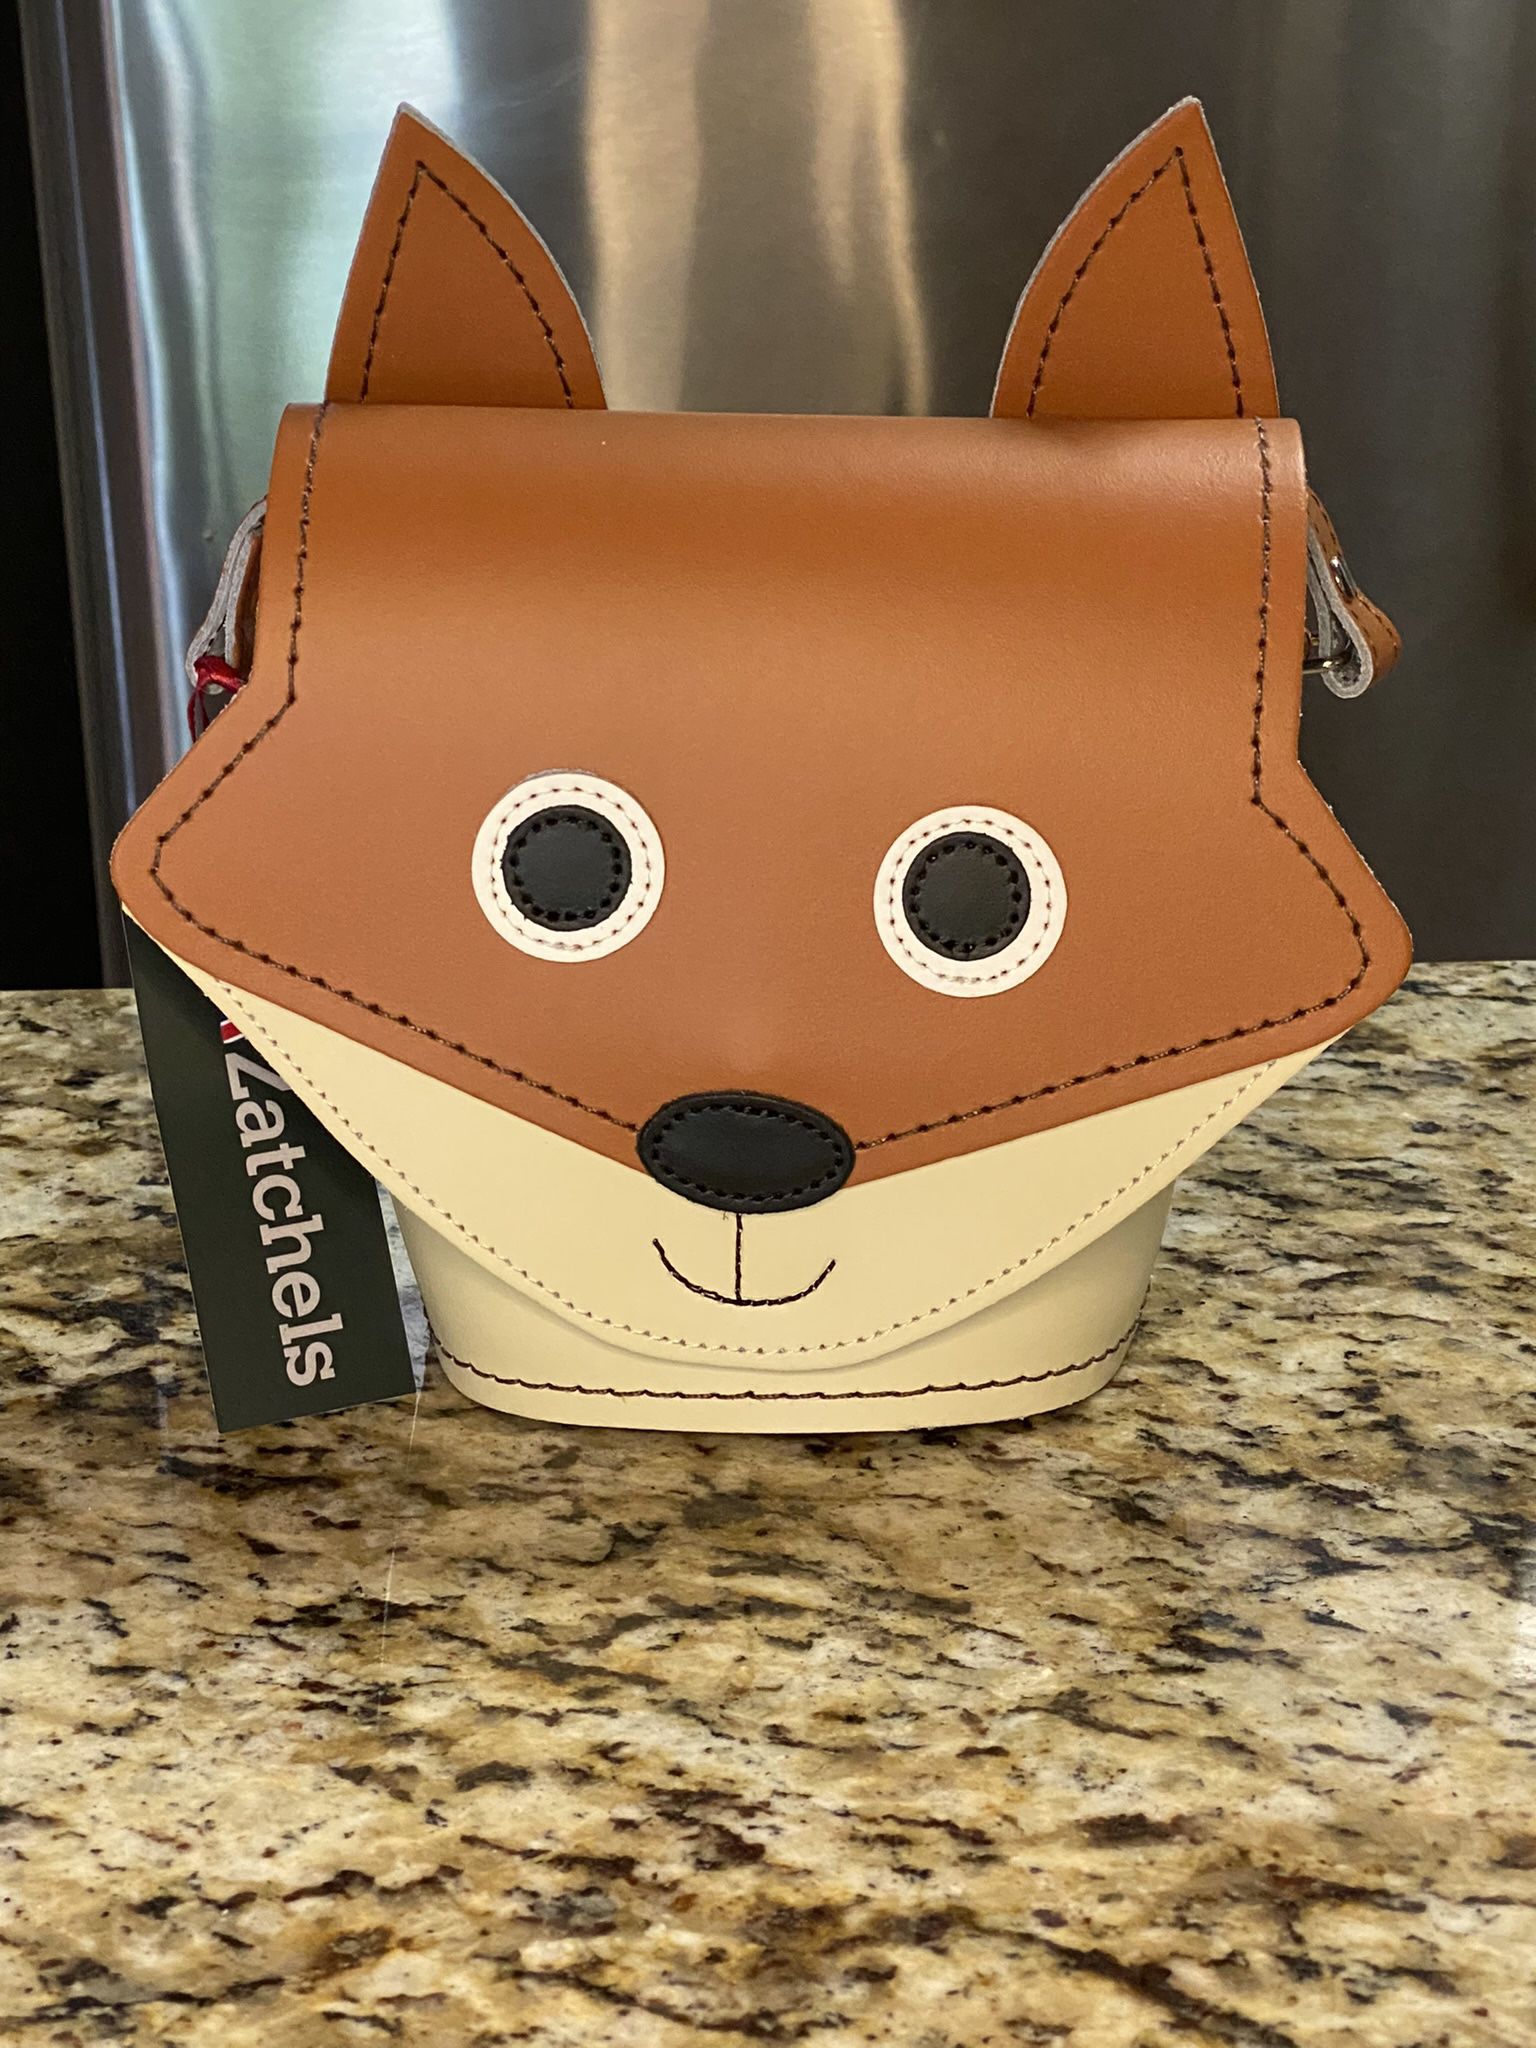 Authentic MCM Zoo Panda Crossbody Bag for Sale in Southlake, TX - OfferUp